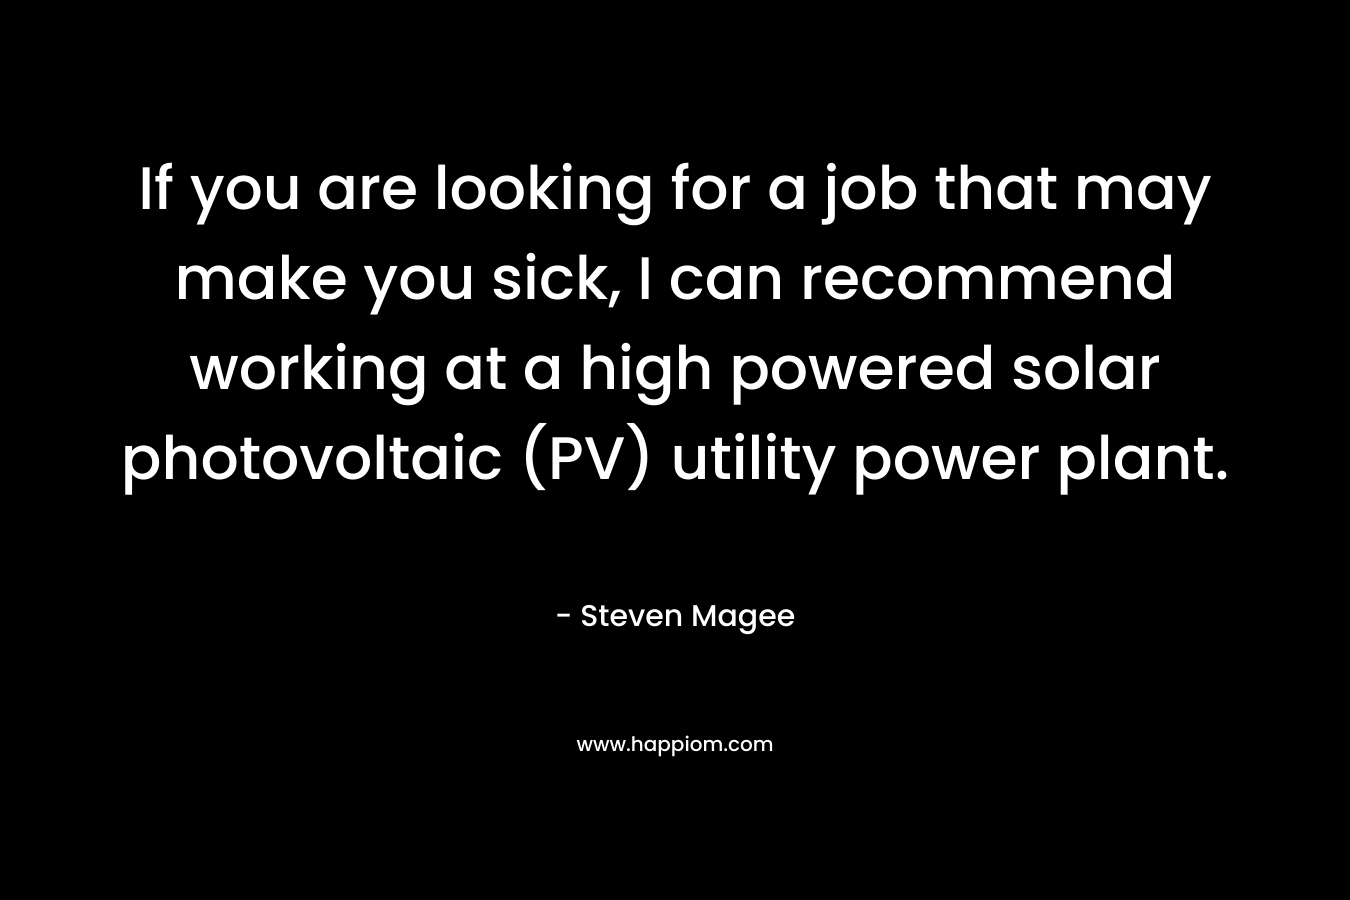 If you are looking for a job that may make you sick, I can recommend working at a high powered solar photovoltaic (PV) utility power plant.